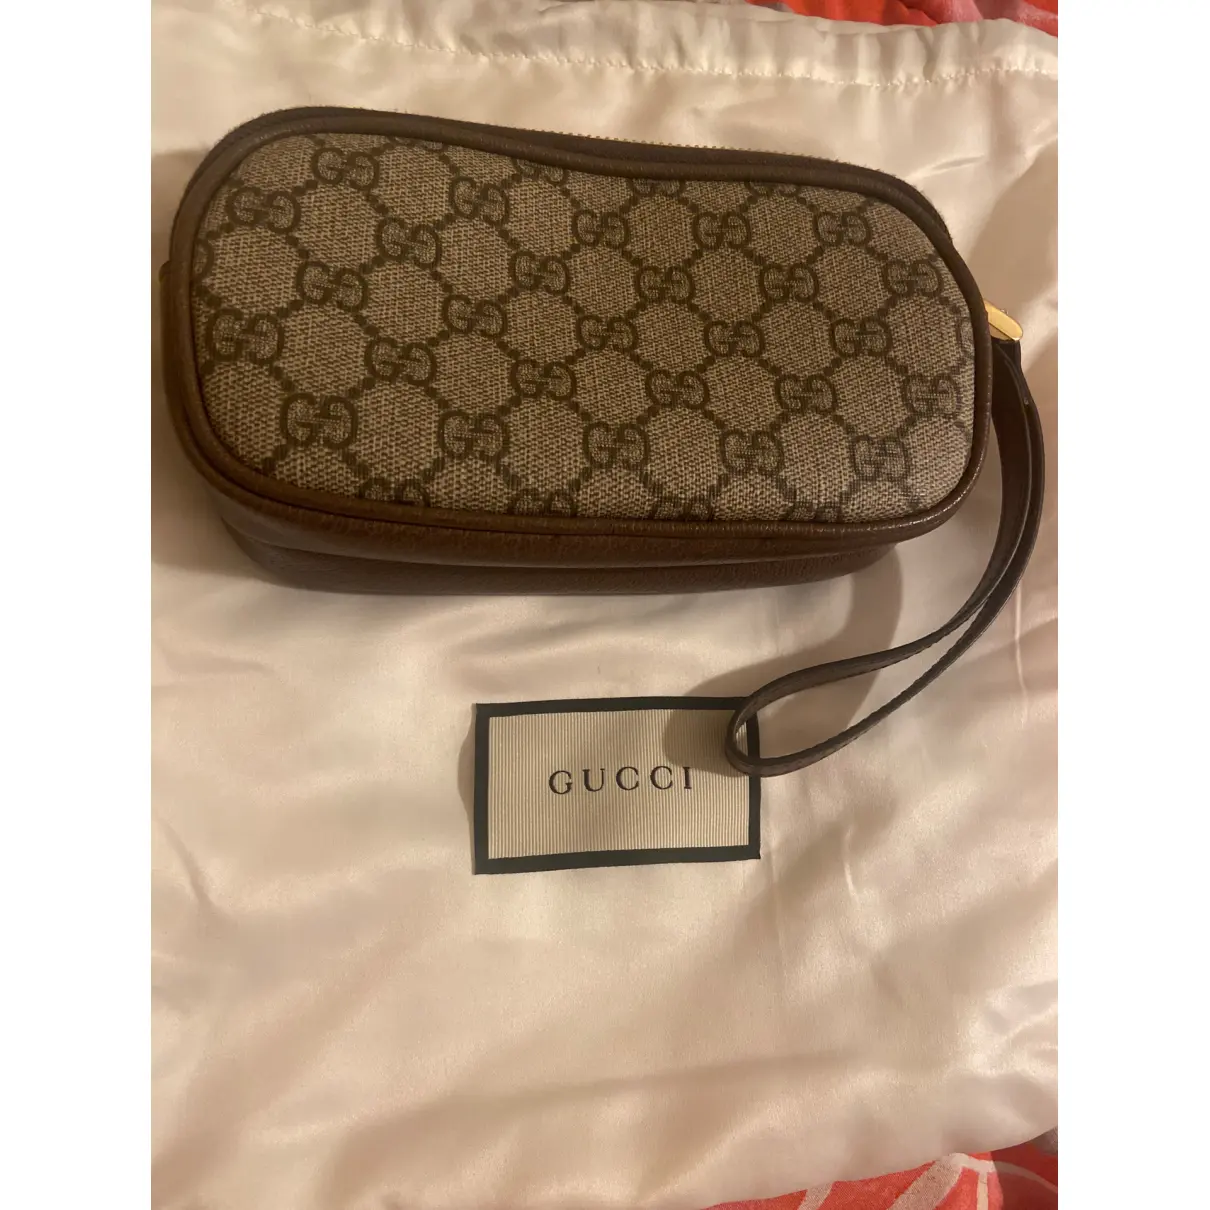 Buy Gucci Ophidia leather clutch bag online